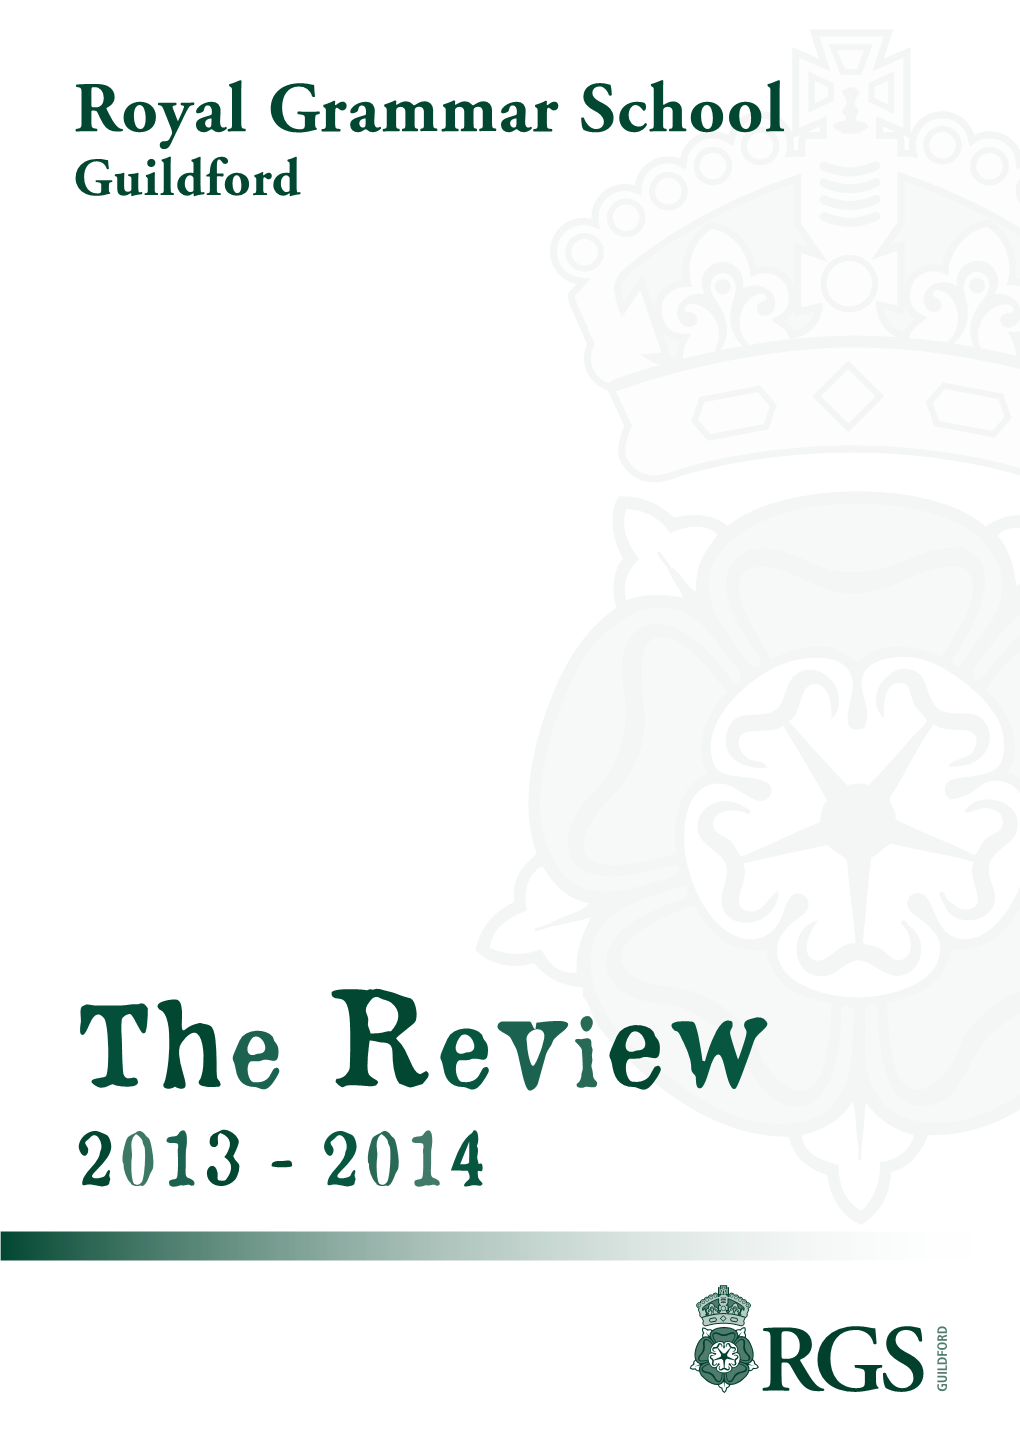 Review 2013-2014 from the HEAD